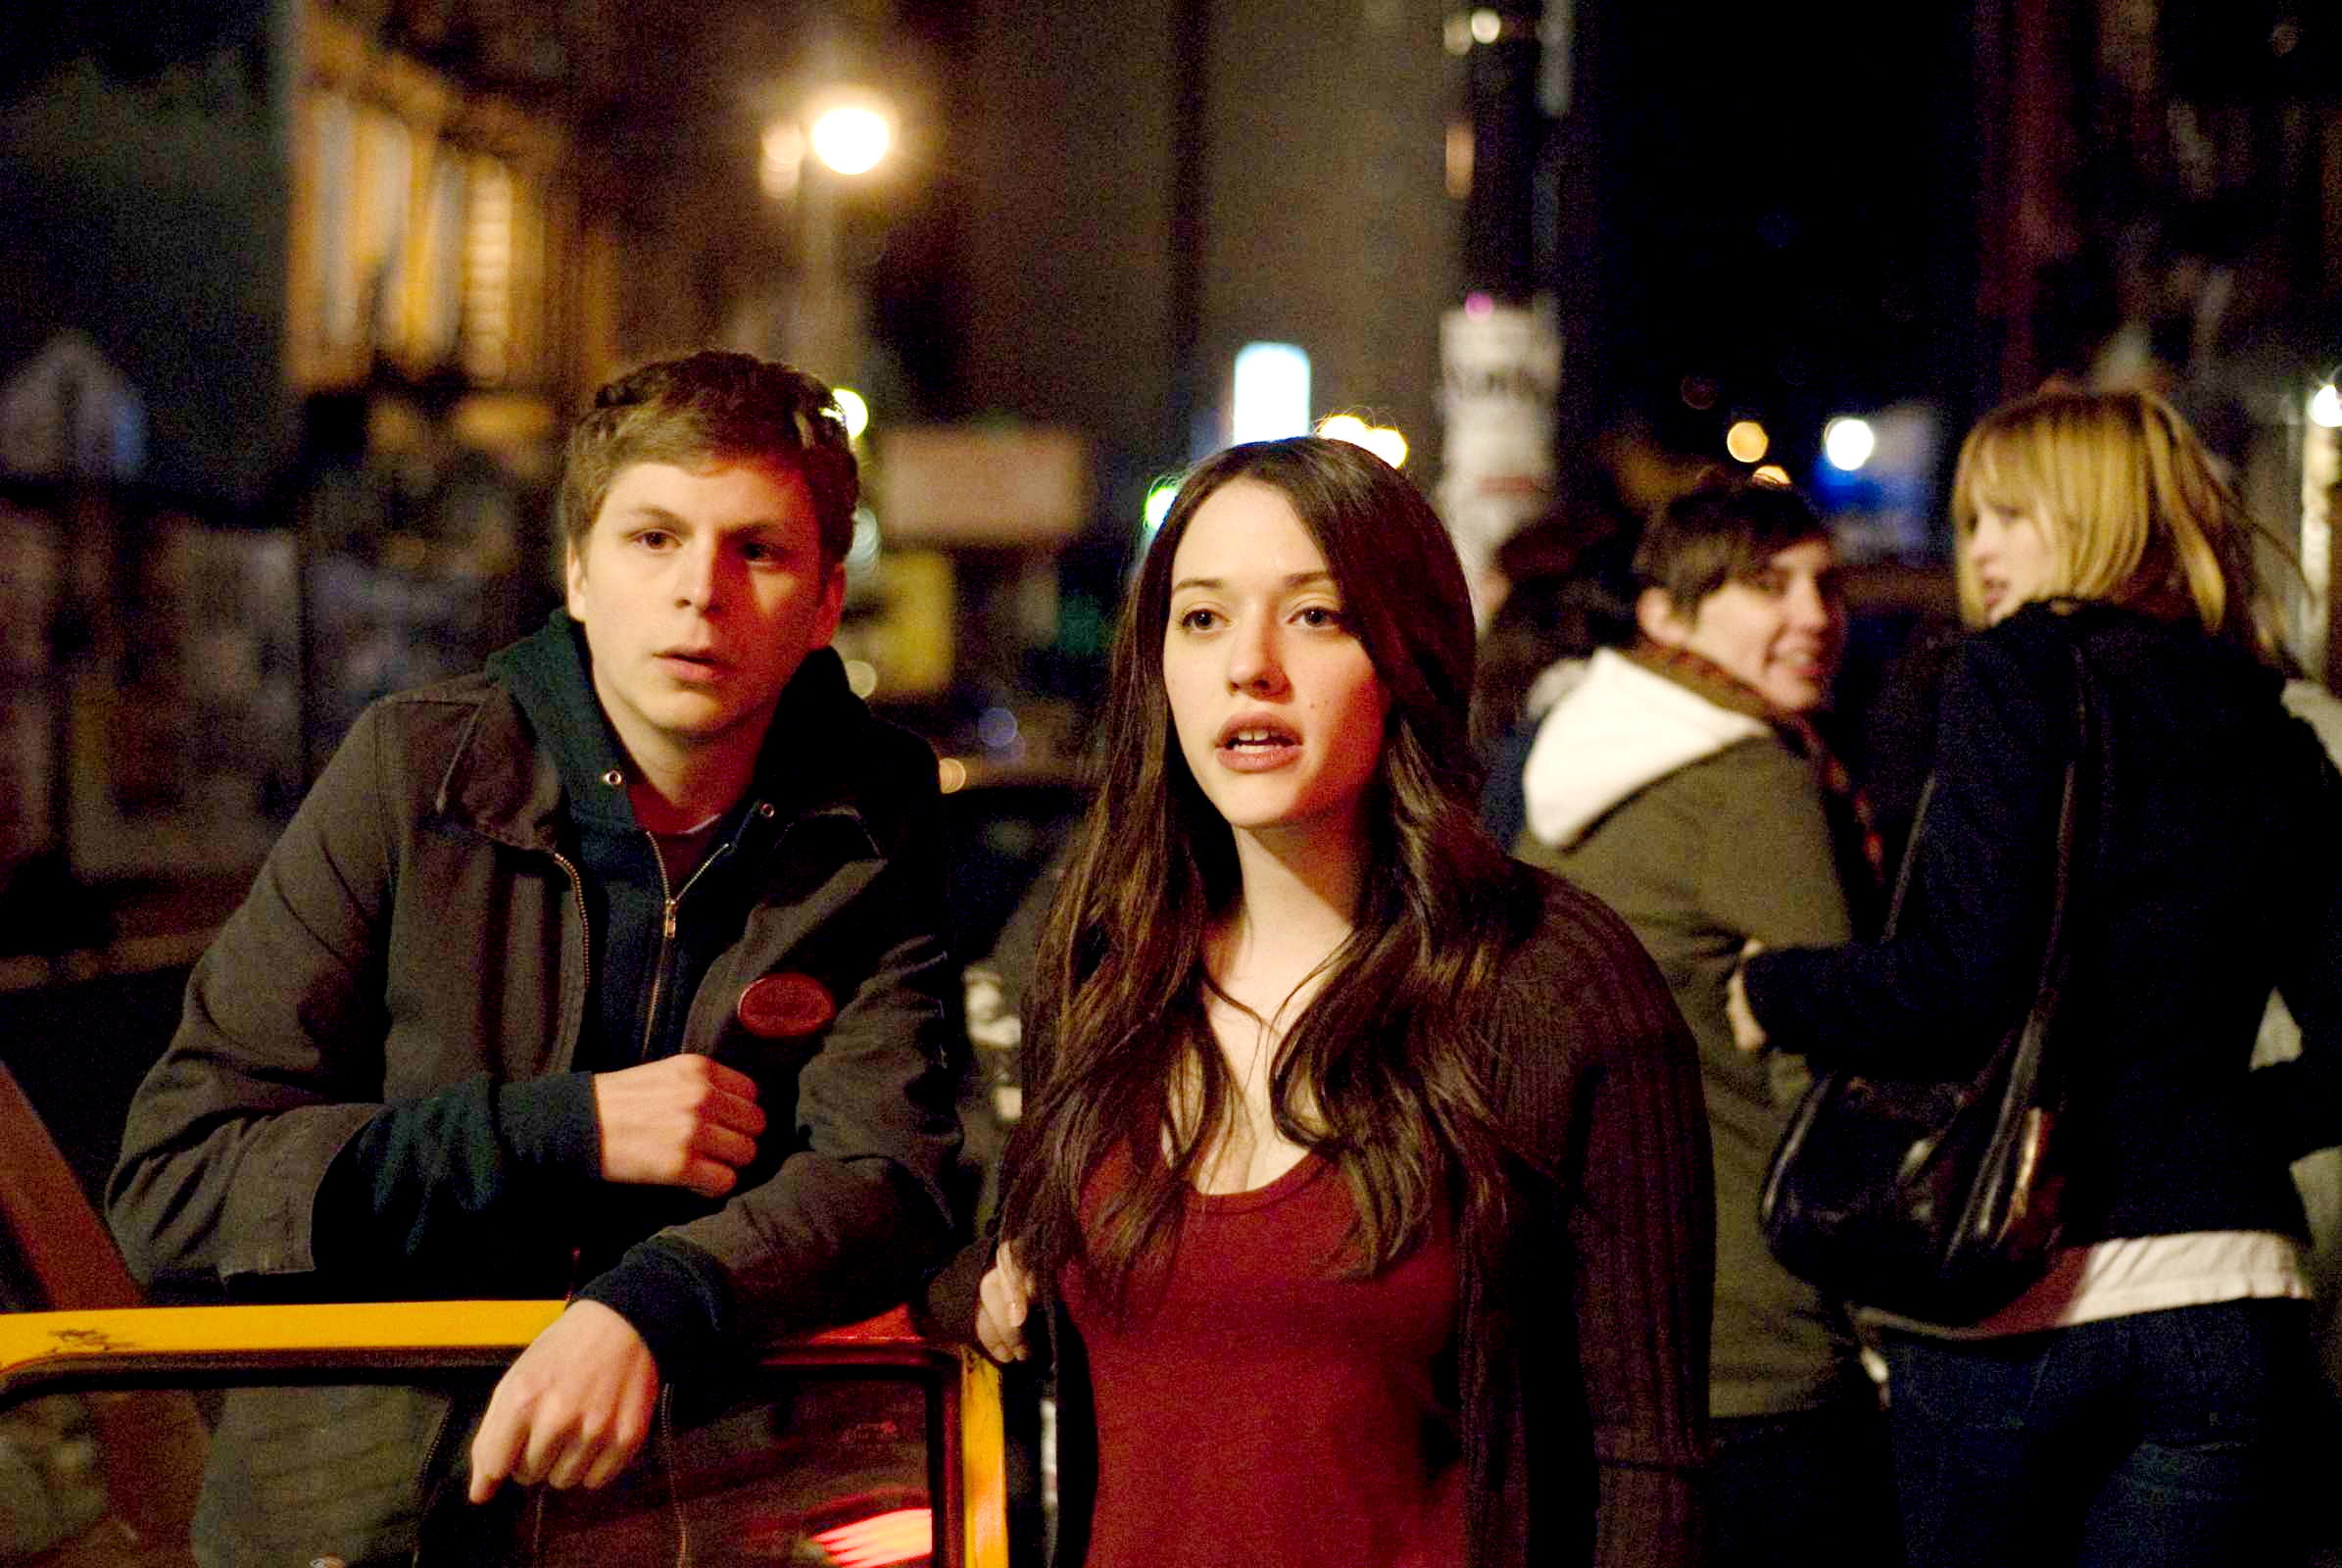 Michael Cera stars as Nick and Kat Dennings stars as Norah in Sony Pictures' Nick and Norah's Infinite Playlist (2008). Photo credit by JoJo Whilden.